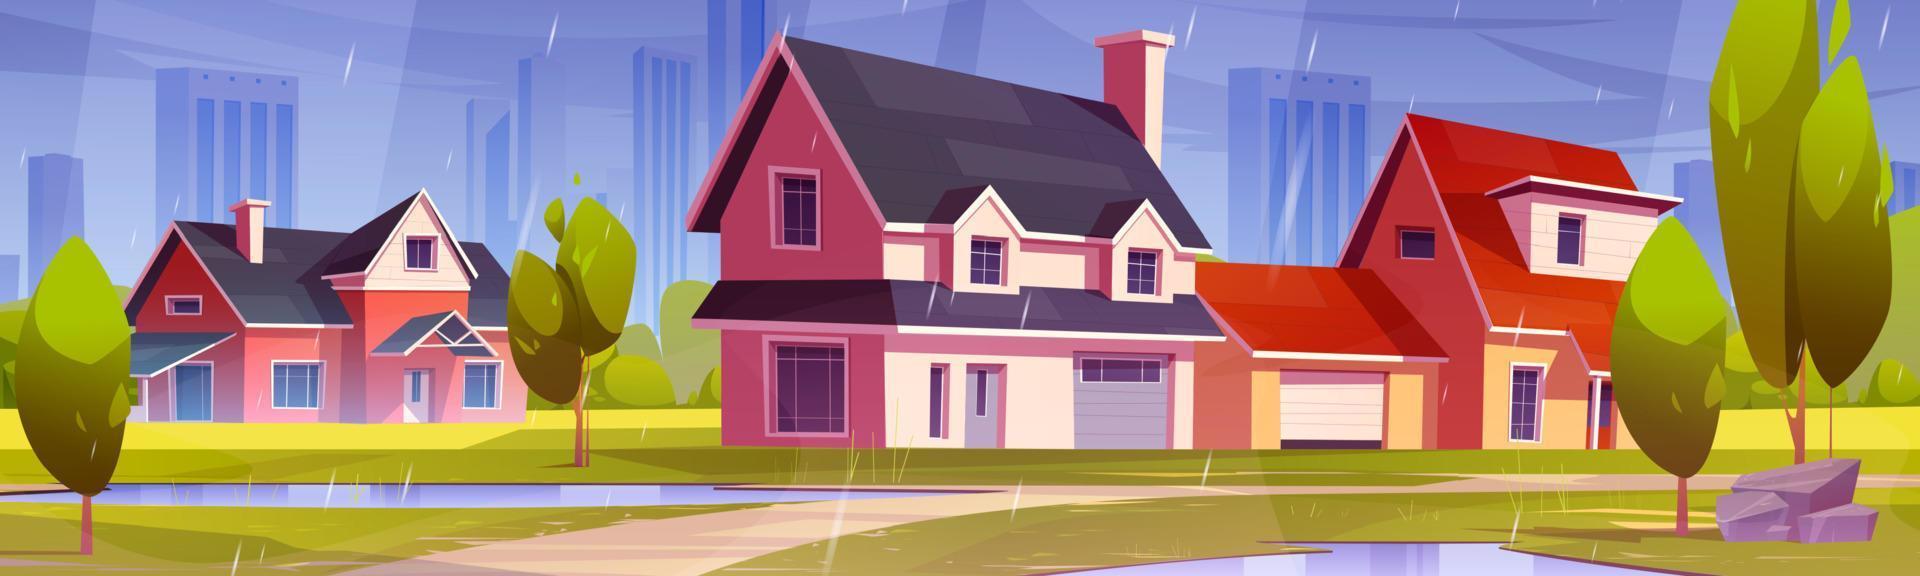 Rain at suburban district with cottage houses vector